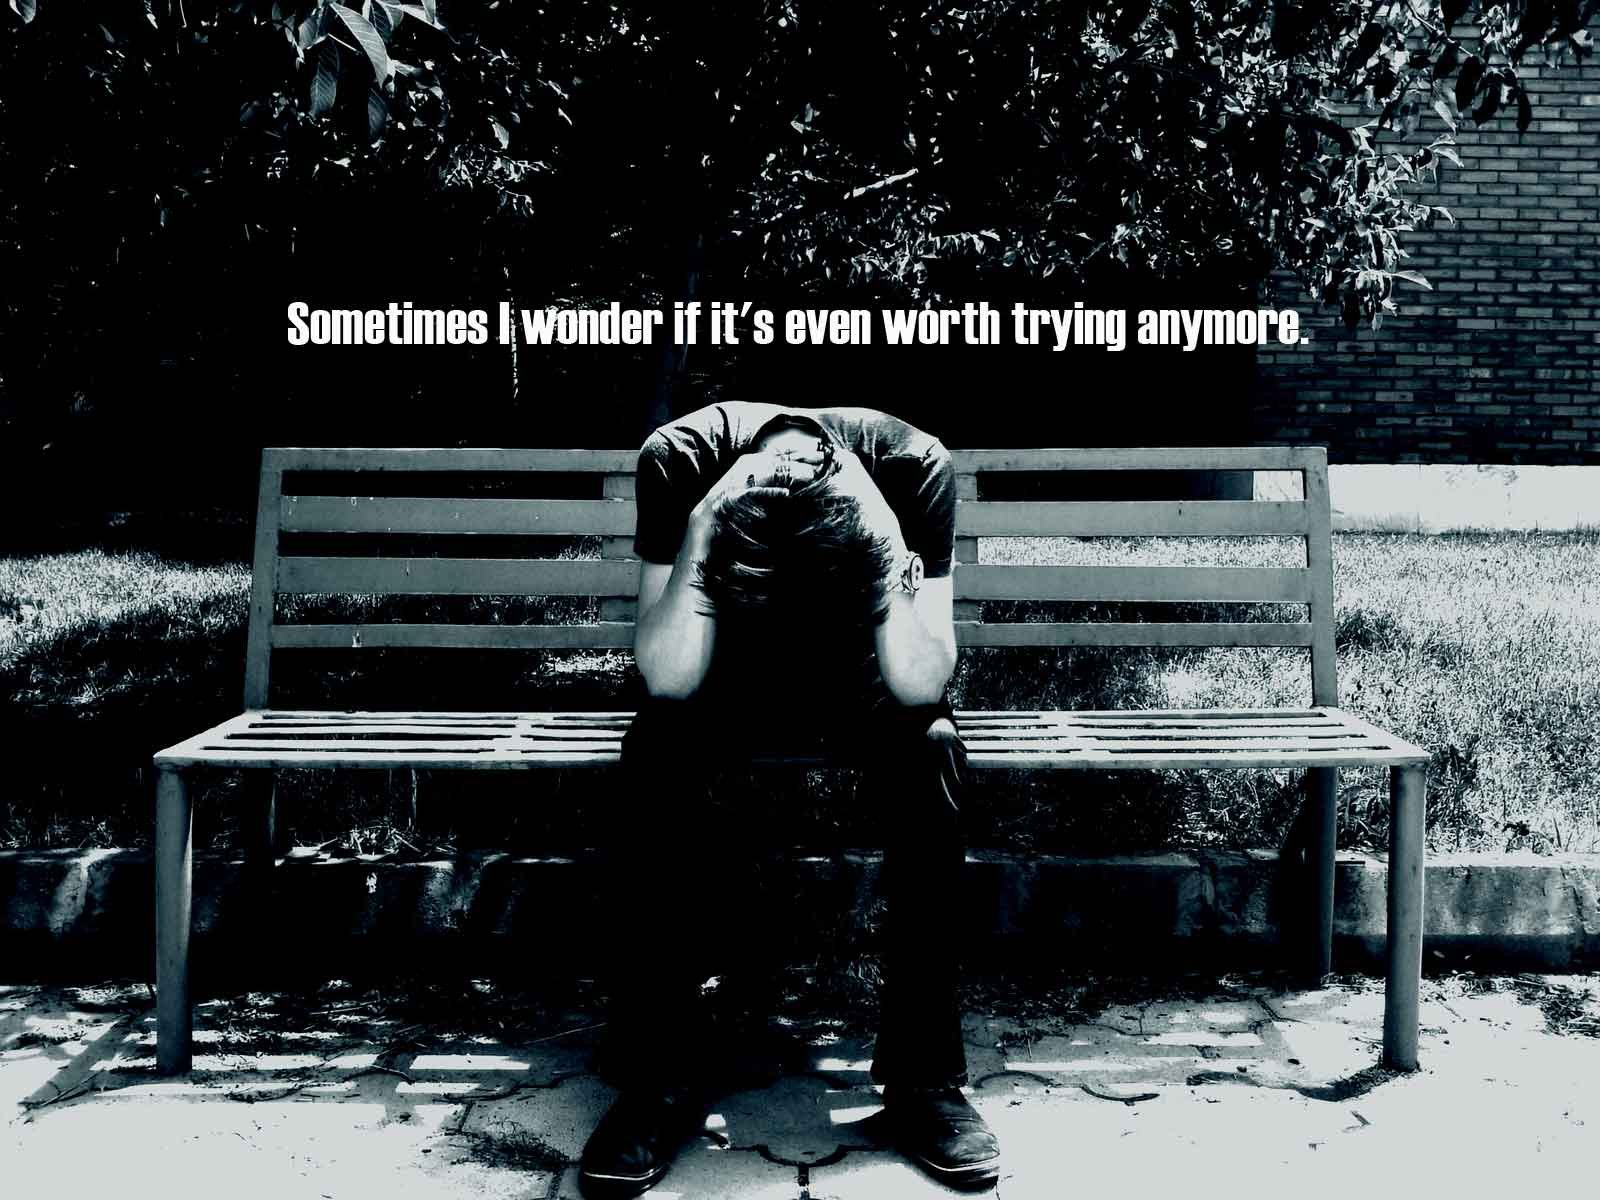 lonely, Mood, Sad, Alone, Sadness, Emotion, People, Loneliness, Solitude Wallpaper